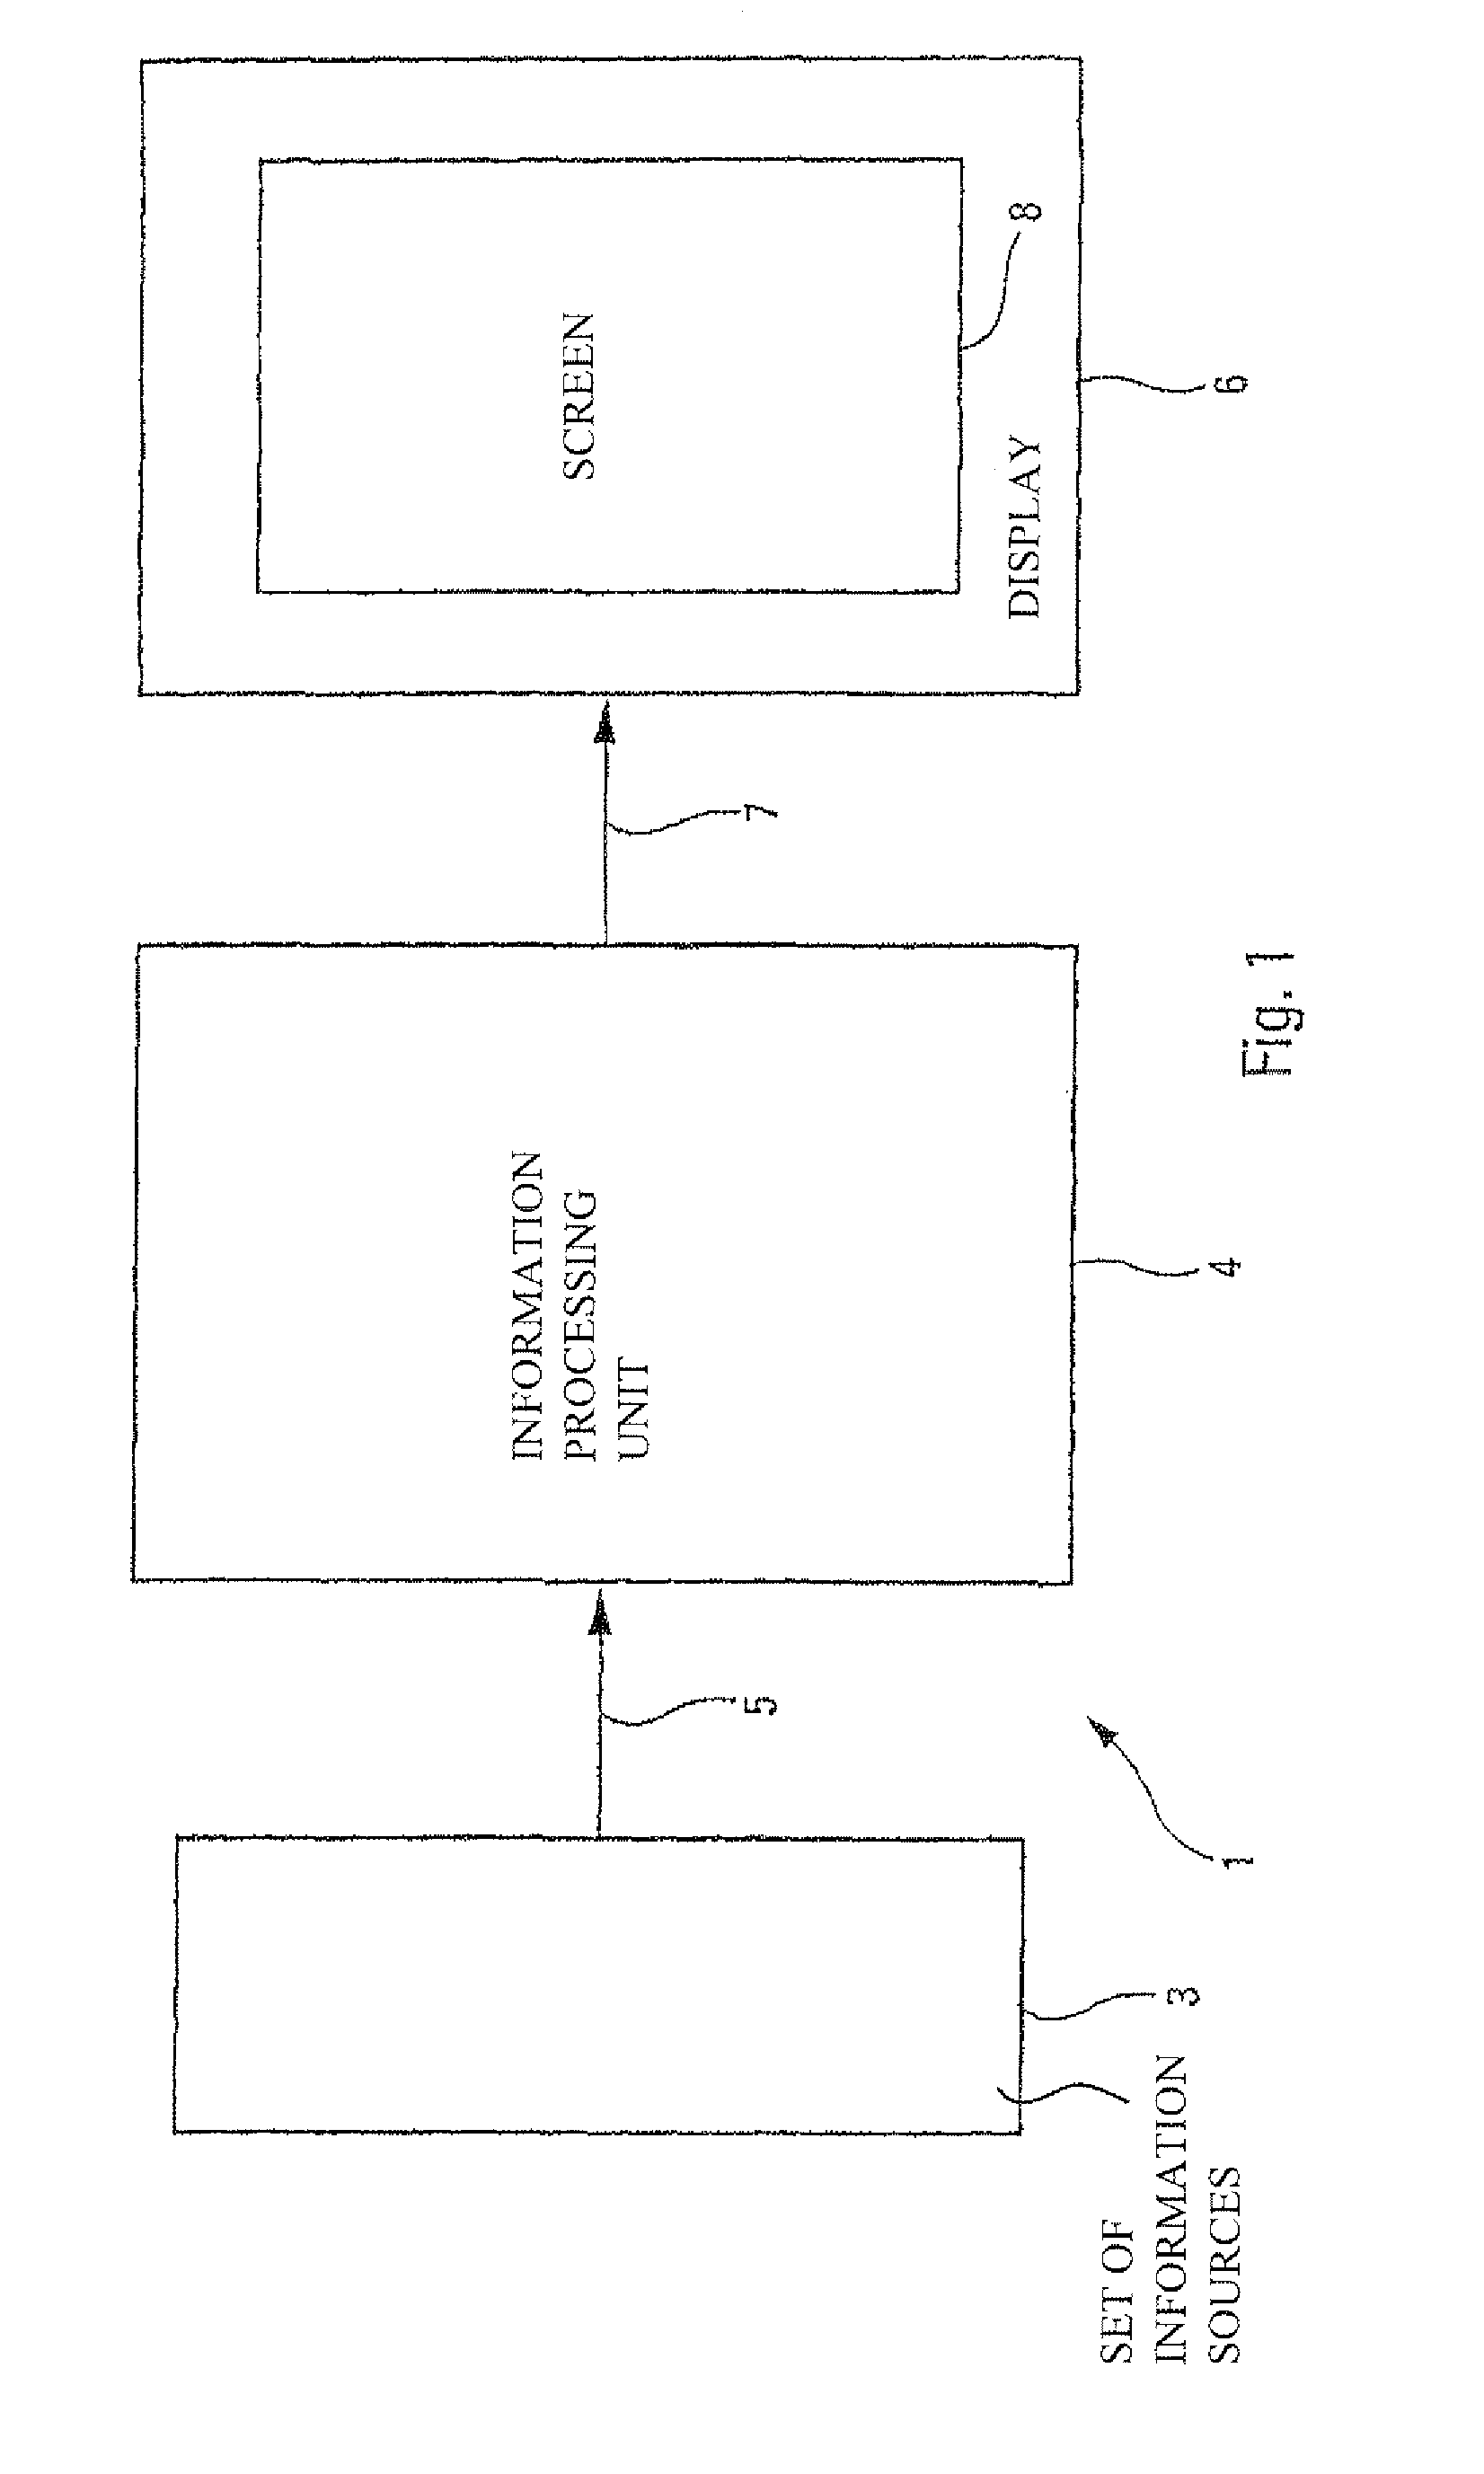 Aircraft standby display device